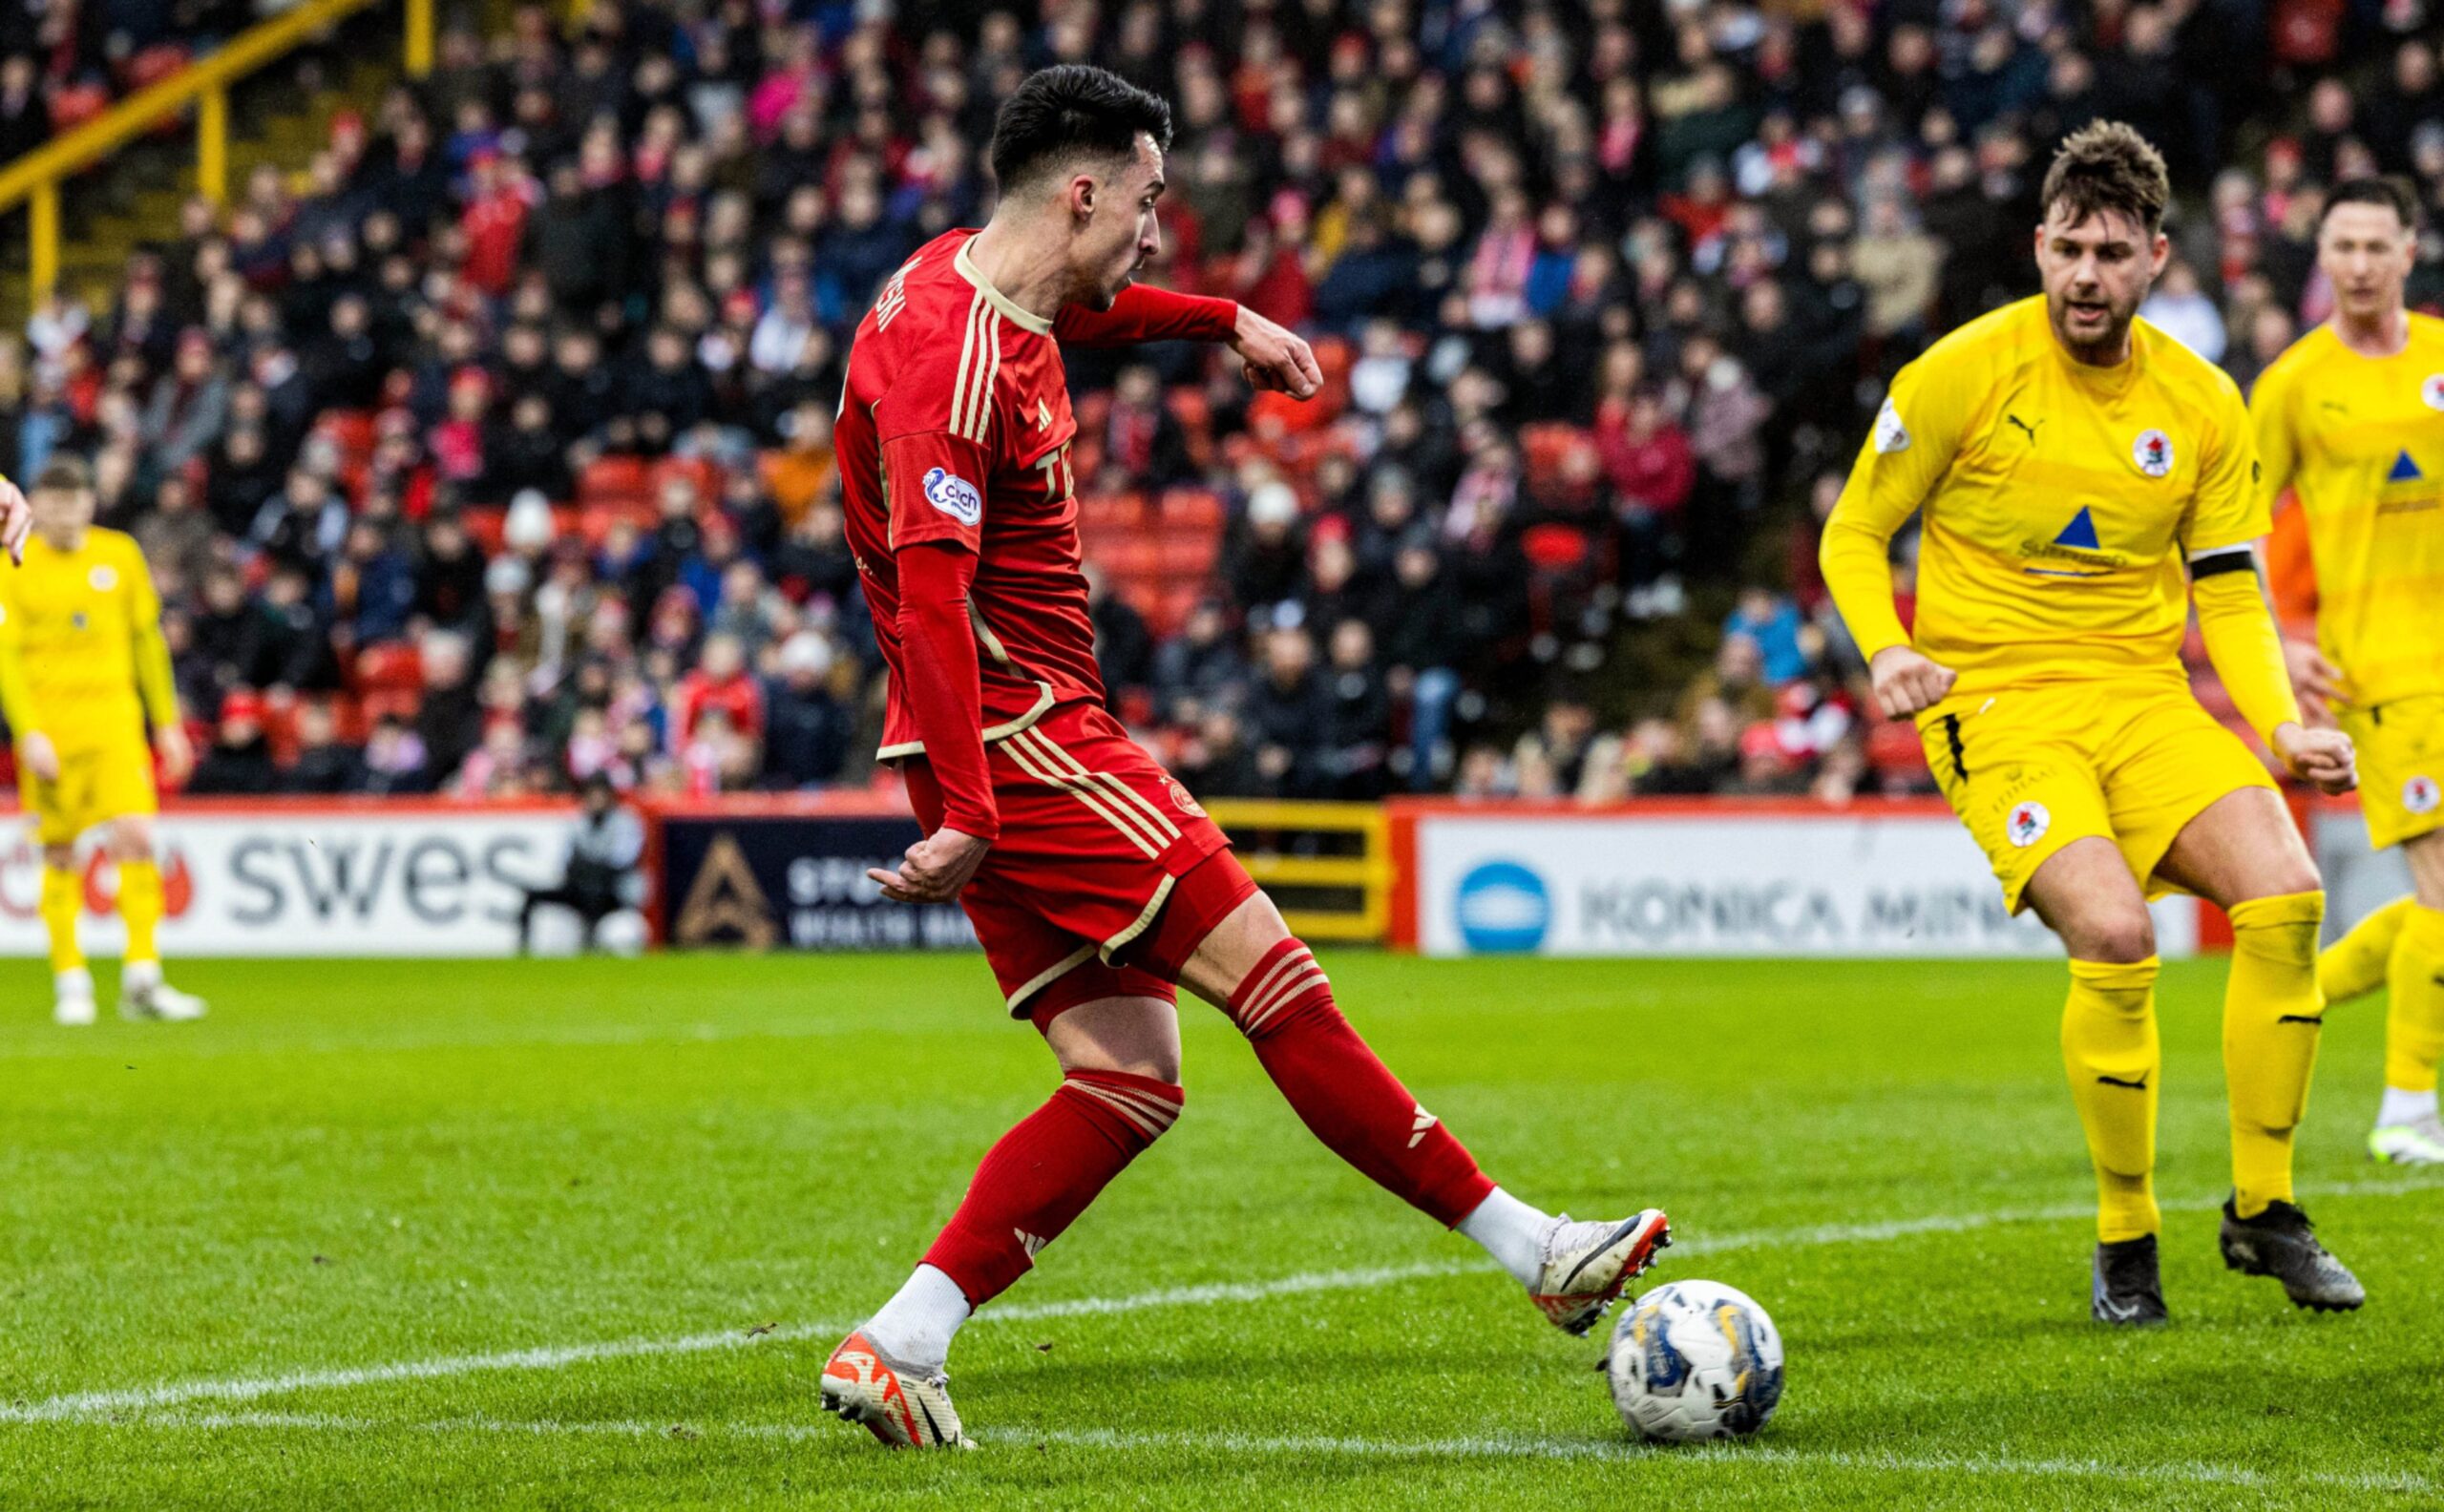 Aberdeen's Bojan Miovski scores to make it 1-0 during a Scottish Cup Fifth Round match against Bonnyrigg Rose at Pittodrie. Image: SNS 